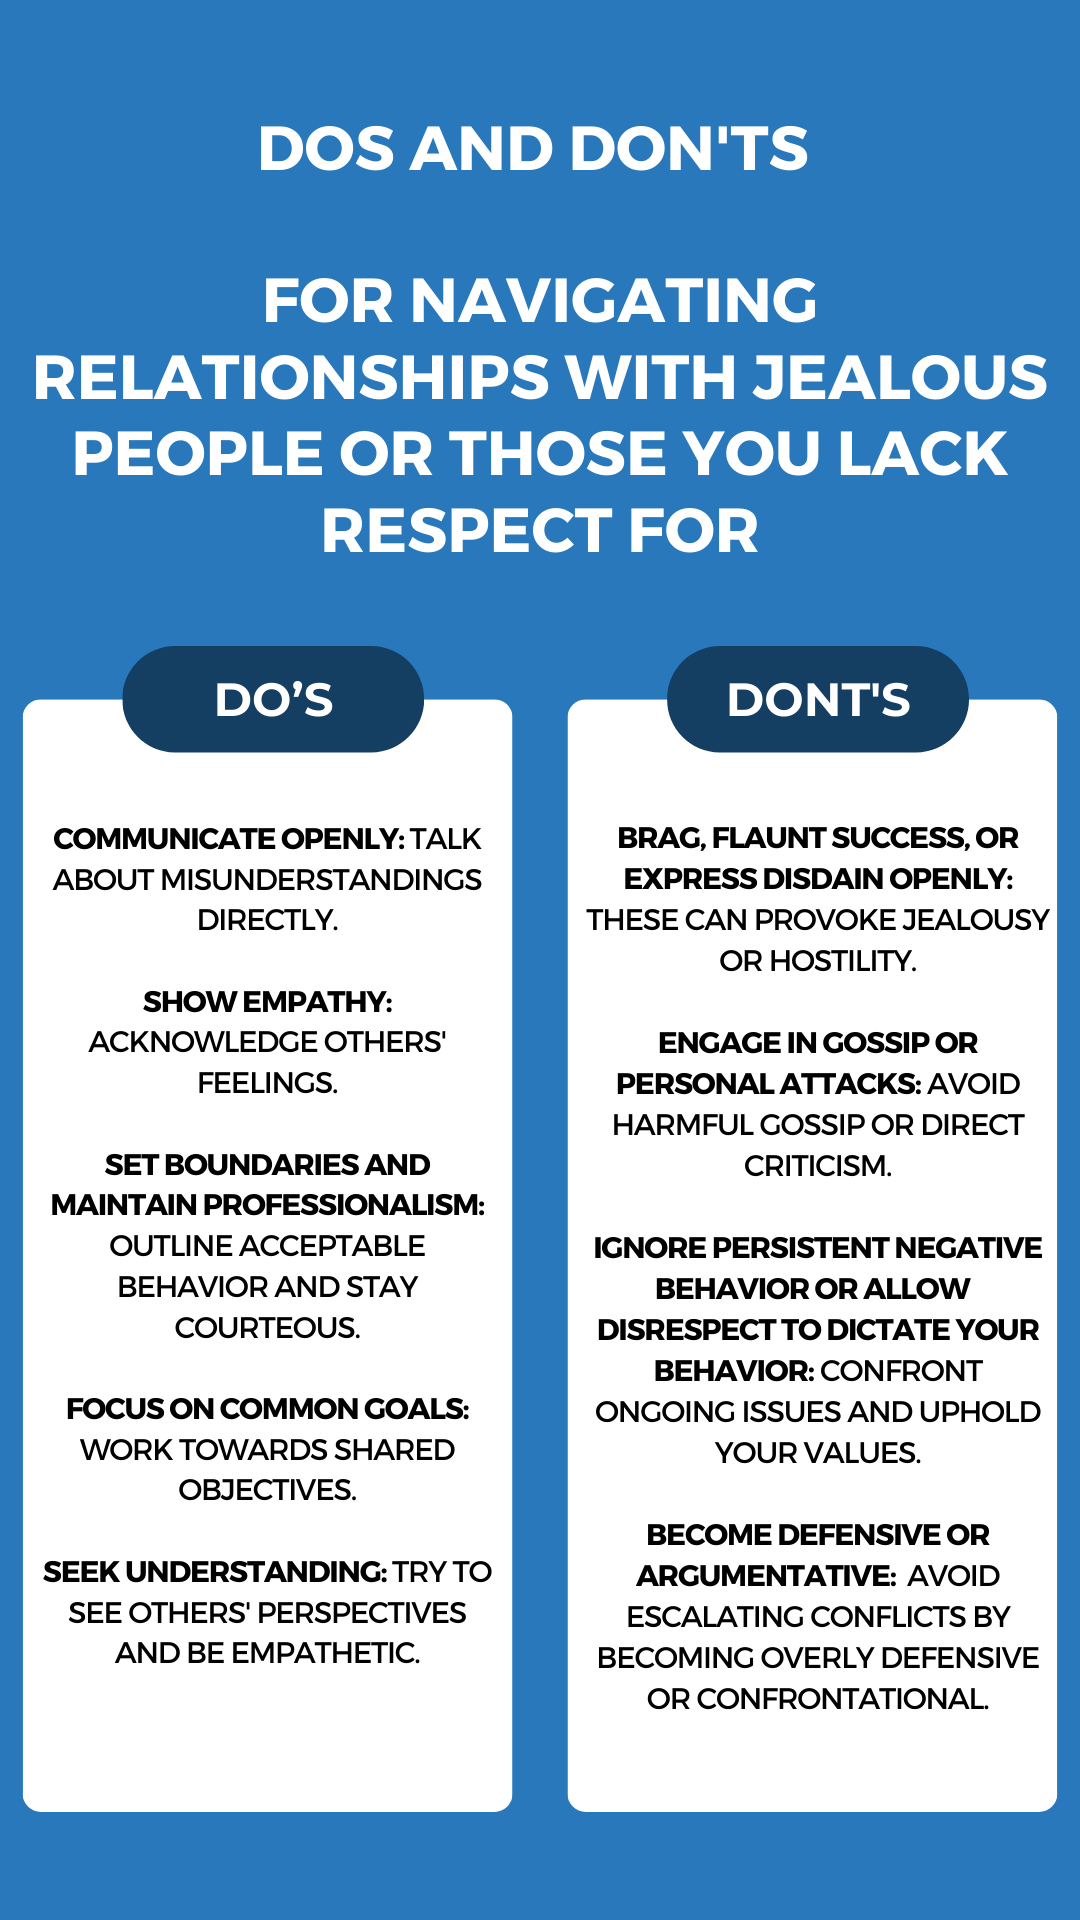 Do's and Don'ts of not being liked